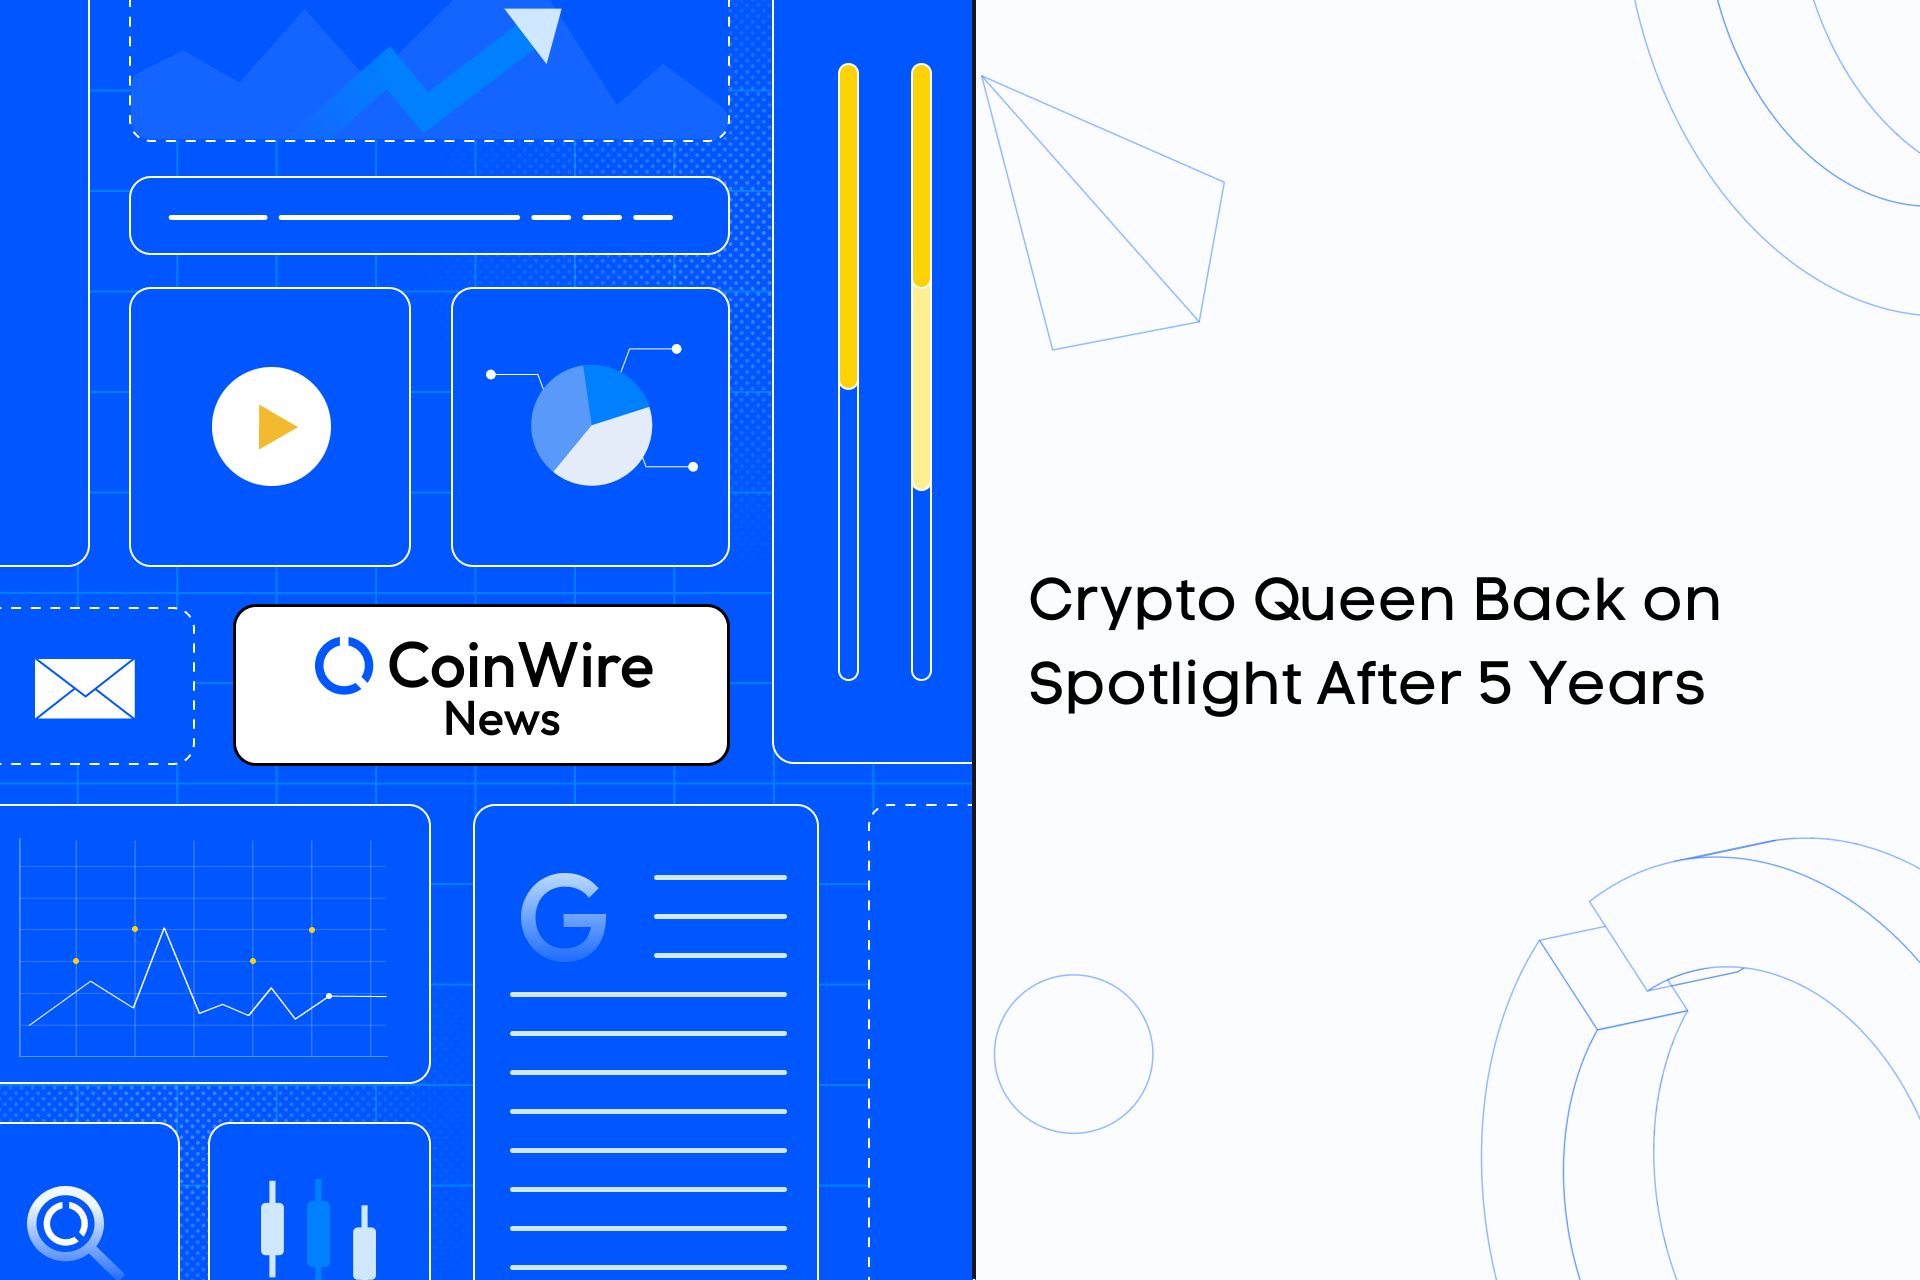 Crypto Queen Back On Spotlight After 5 Years